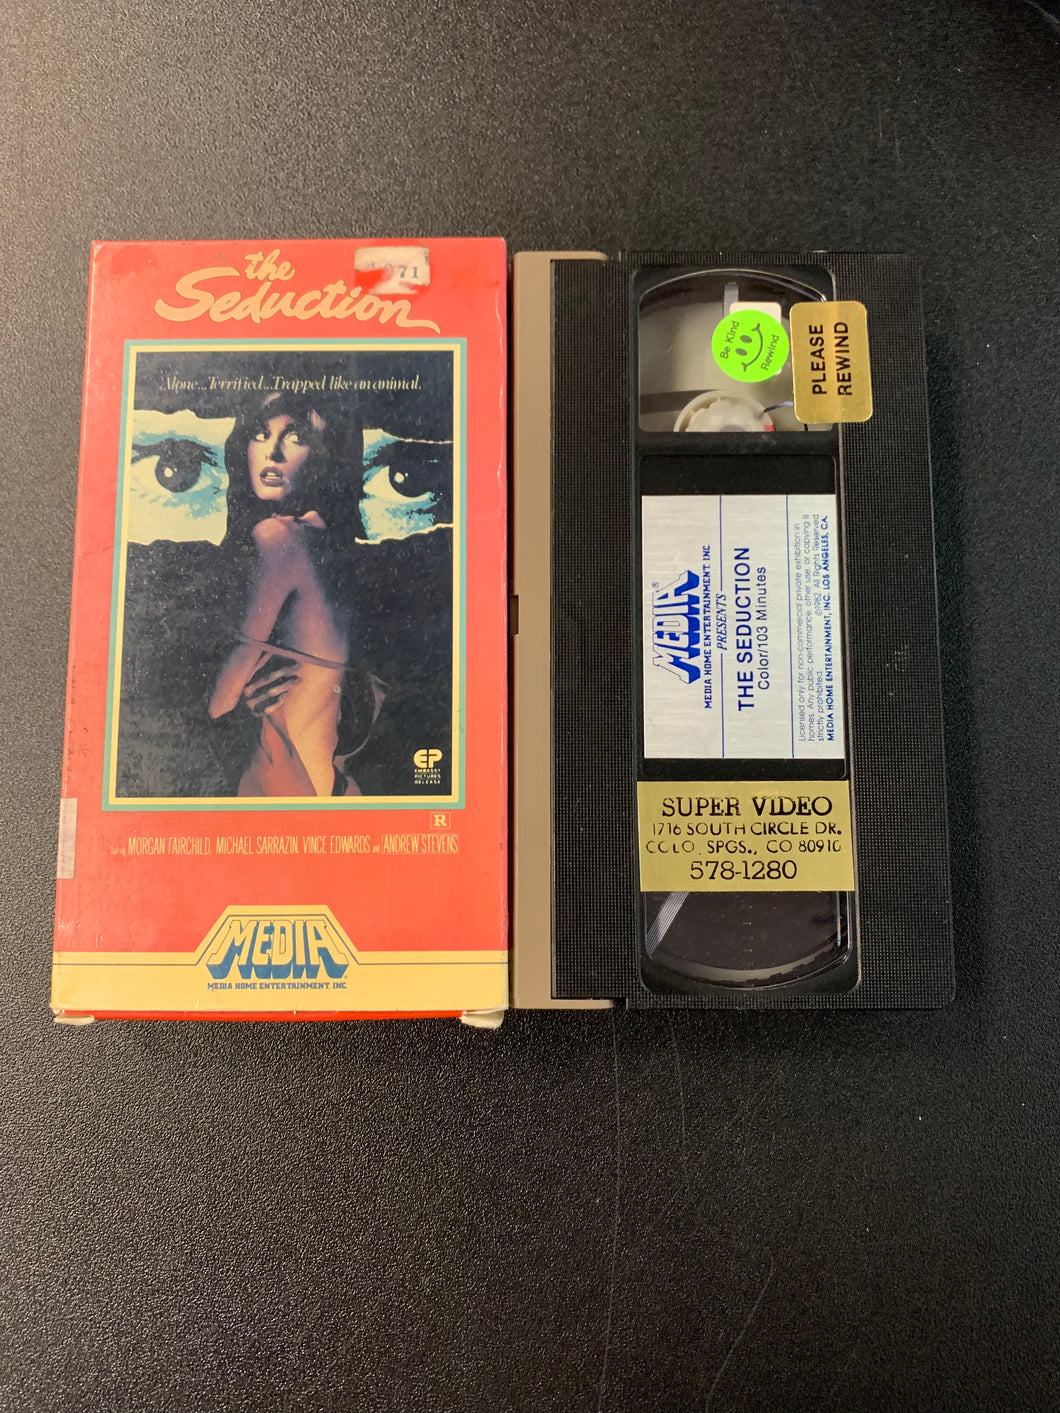 THE SEDUCTION RENTAL VHS PREOWNED